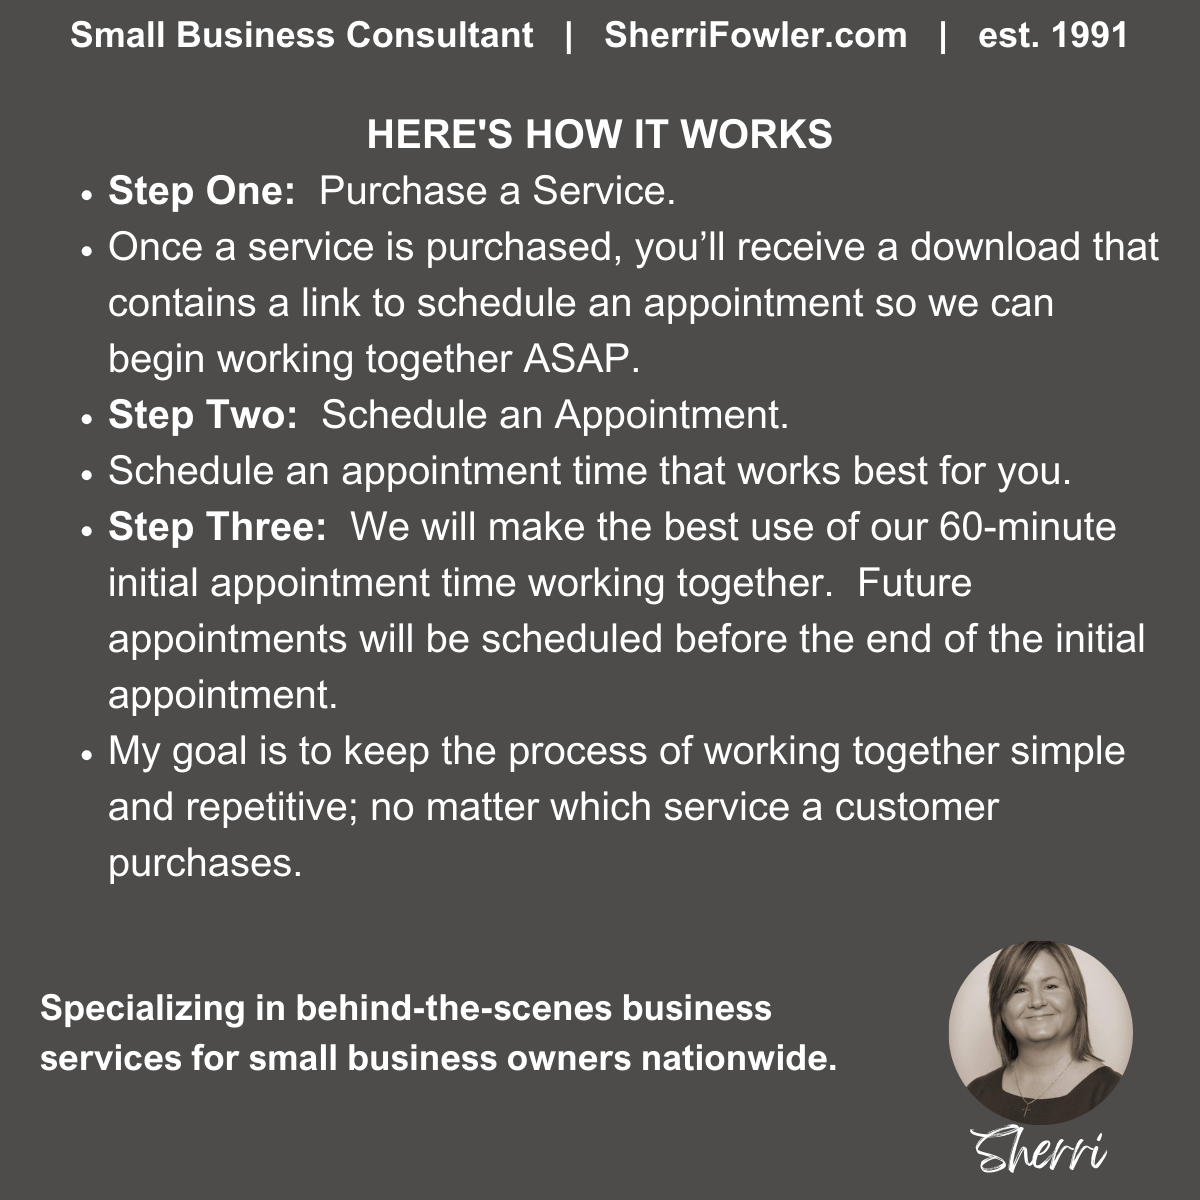 Sherri Smith offers social media marketing for small businesses and small business owners through SherriFowler.com